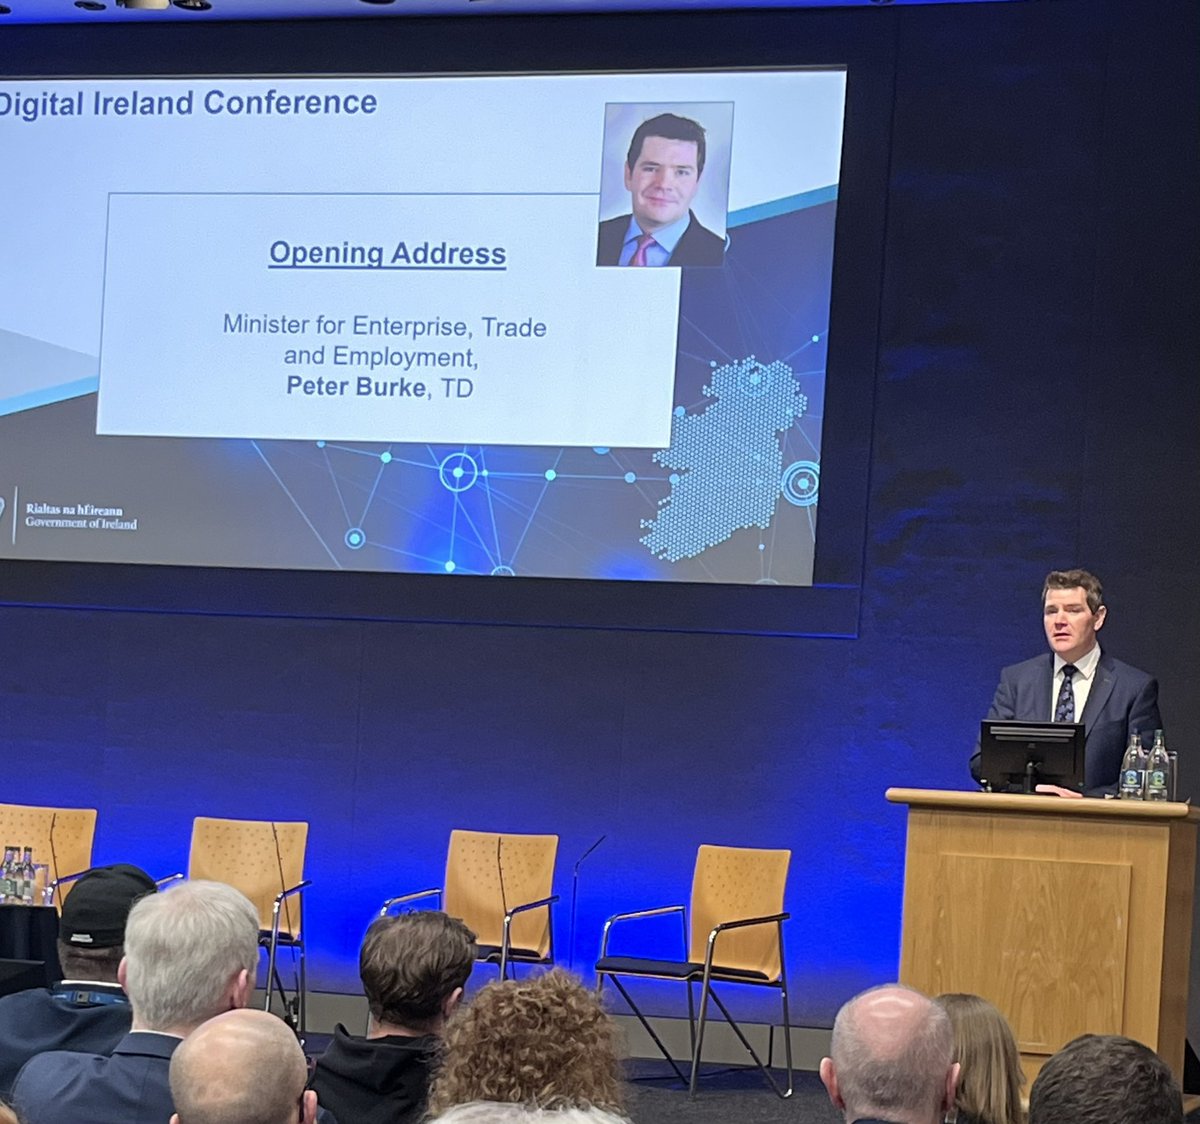 A great opening to the #DigitalIrelandConference by @peterburkefg setting out the ambition of the Irish Government for increased digital adoption, digital skills and leading on digital regulation - aligning with the key focus areas for @technology_irl members